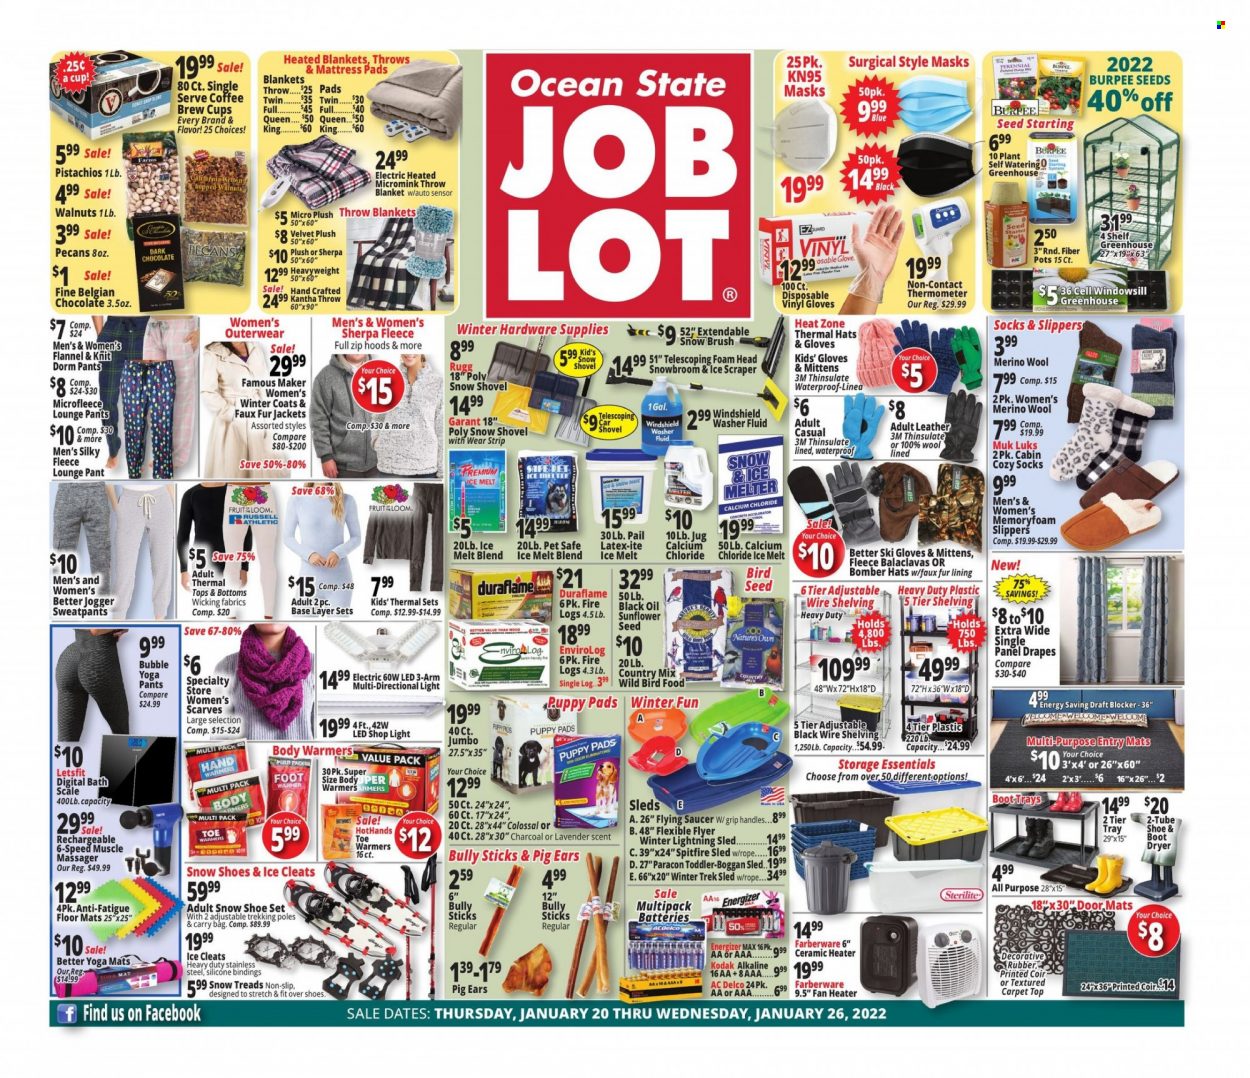 thumbnail - Ocean State Job Lot Flyer - 01/20/2022 - 01/26/2022 - Sales products - shoes, slippers, cleats, scale, personal scale, chocolate, dark chocolate, oil, walnuts, pecans, pistachios, thermometer, gloves, tray, pot, saucer, eraser, battery, Energizer, blanket, mattress protector, puppy pads, animal food, animal treats, bird food, plant seeds, pig ears, massager, coat, jacket, winter coat, pants, t-shirt, tops, sweatpants, socks, yoga leggins, scarf, hat, carry bag, yoga mat, floor mat, shop light, fan heater, carpet, shovel, snow shovel, greenhouse, ice melter, washer fluid. Page 1.